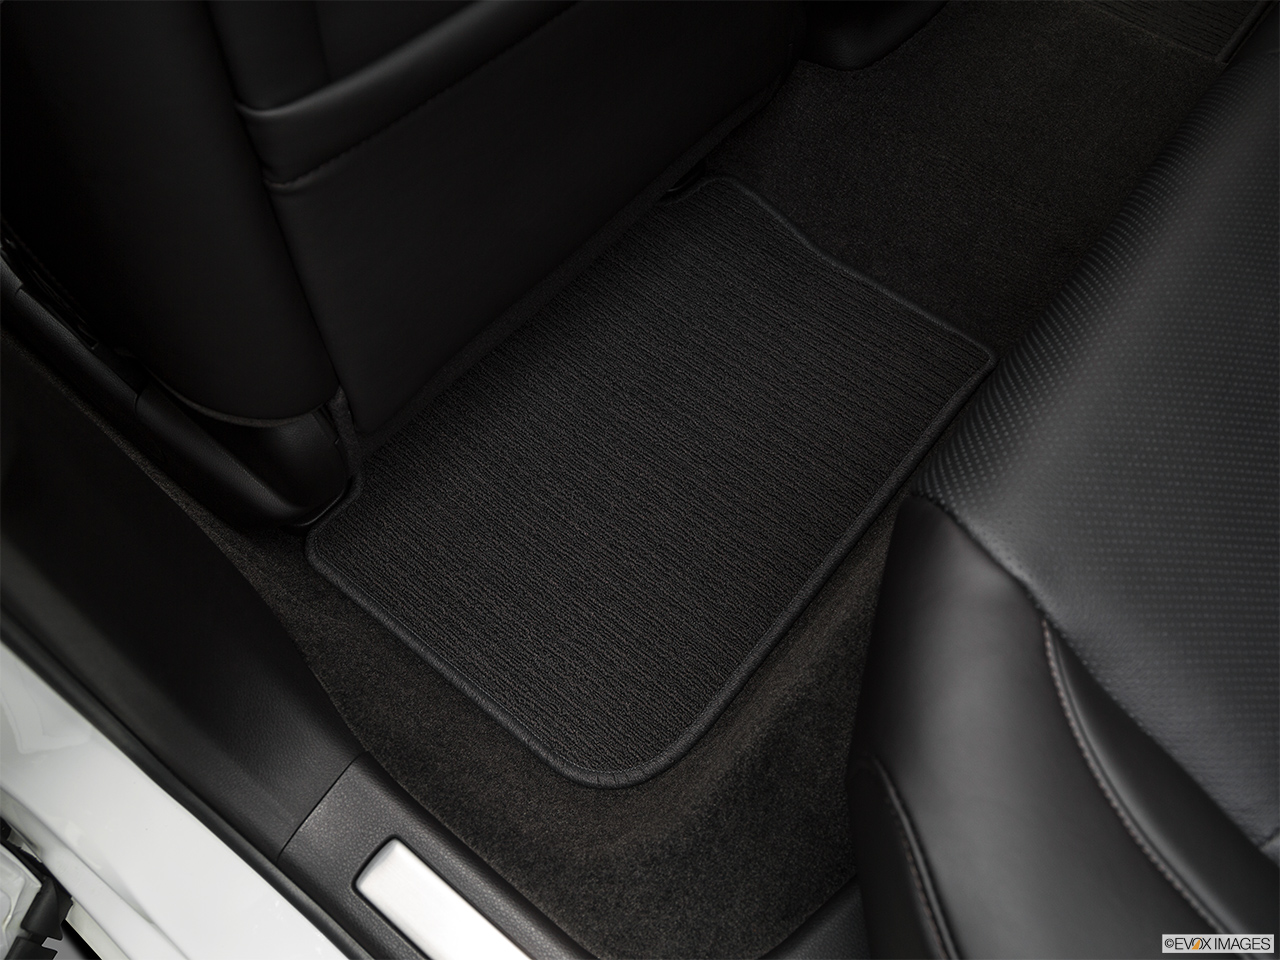 2017 Acura TLX 3.5L Rear driver's side floor mat. Mid-seat level from outside looking in. 